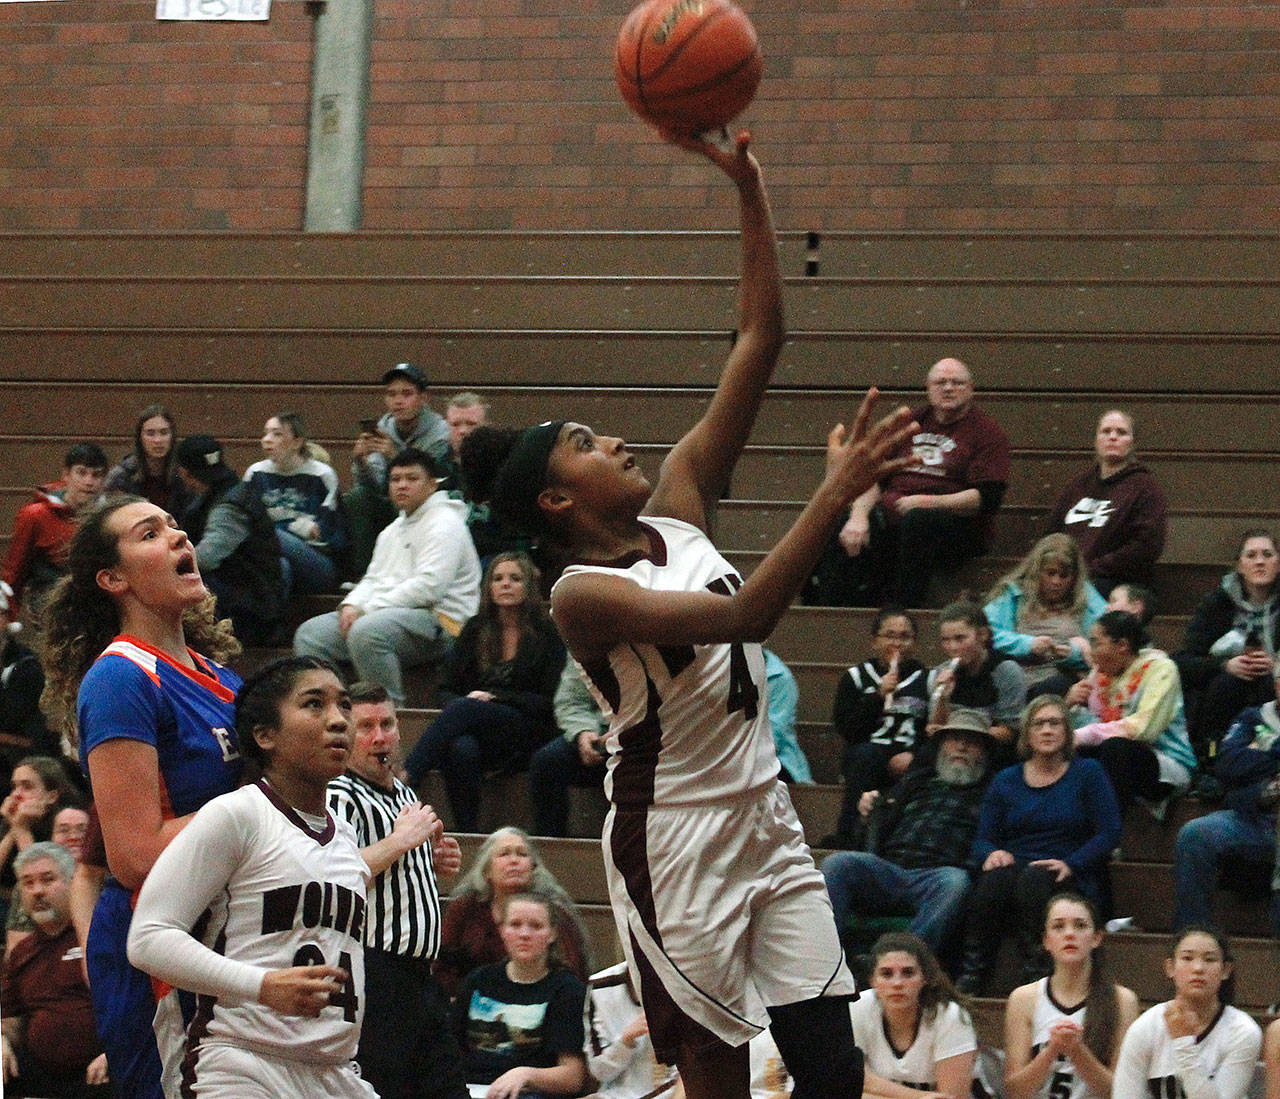 South Kitsap finds its groove in the fourth quarter to beat Graham-Kapowsin